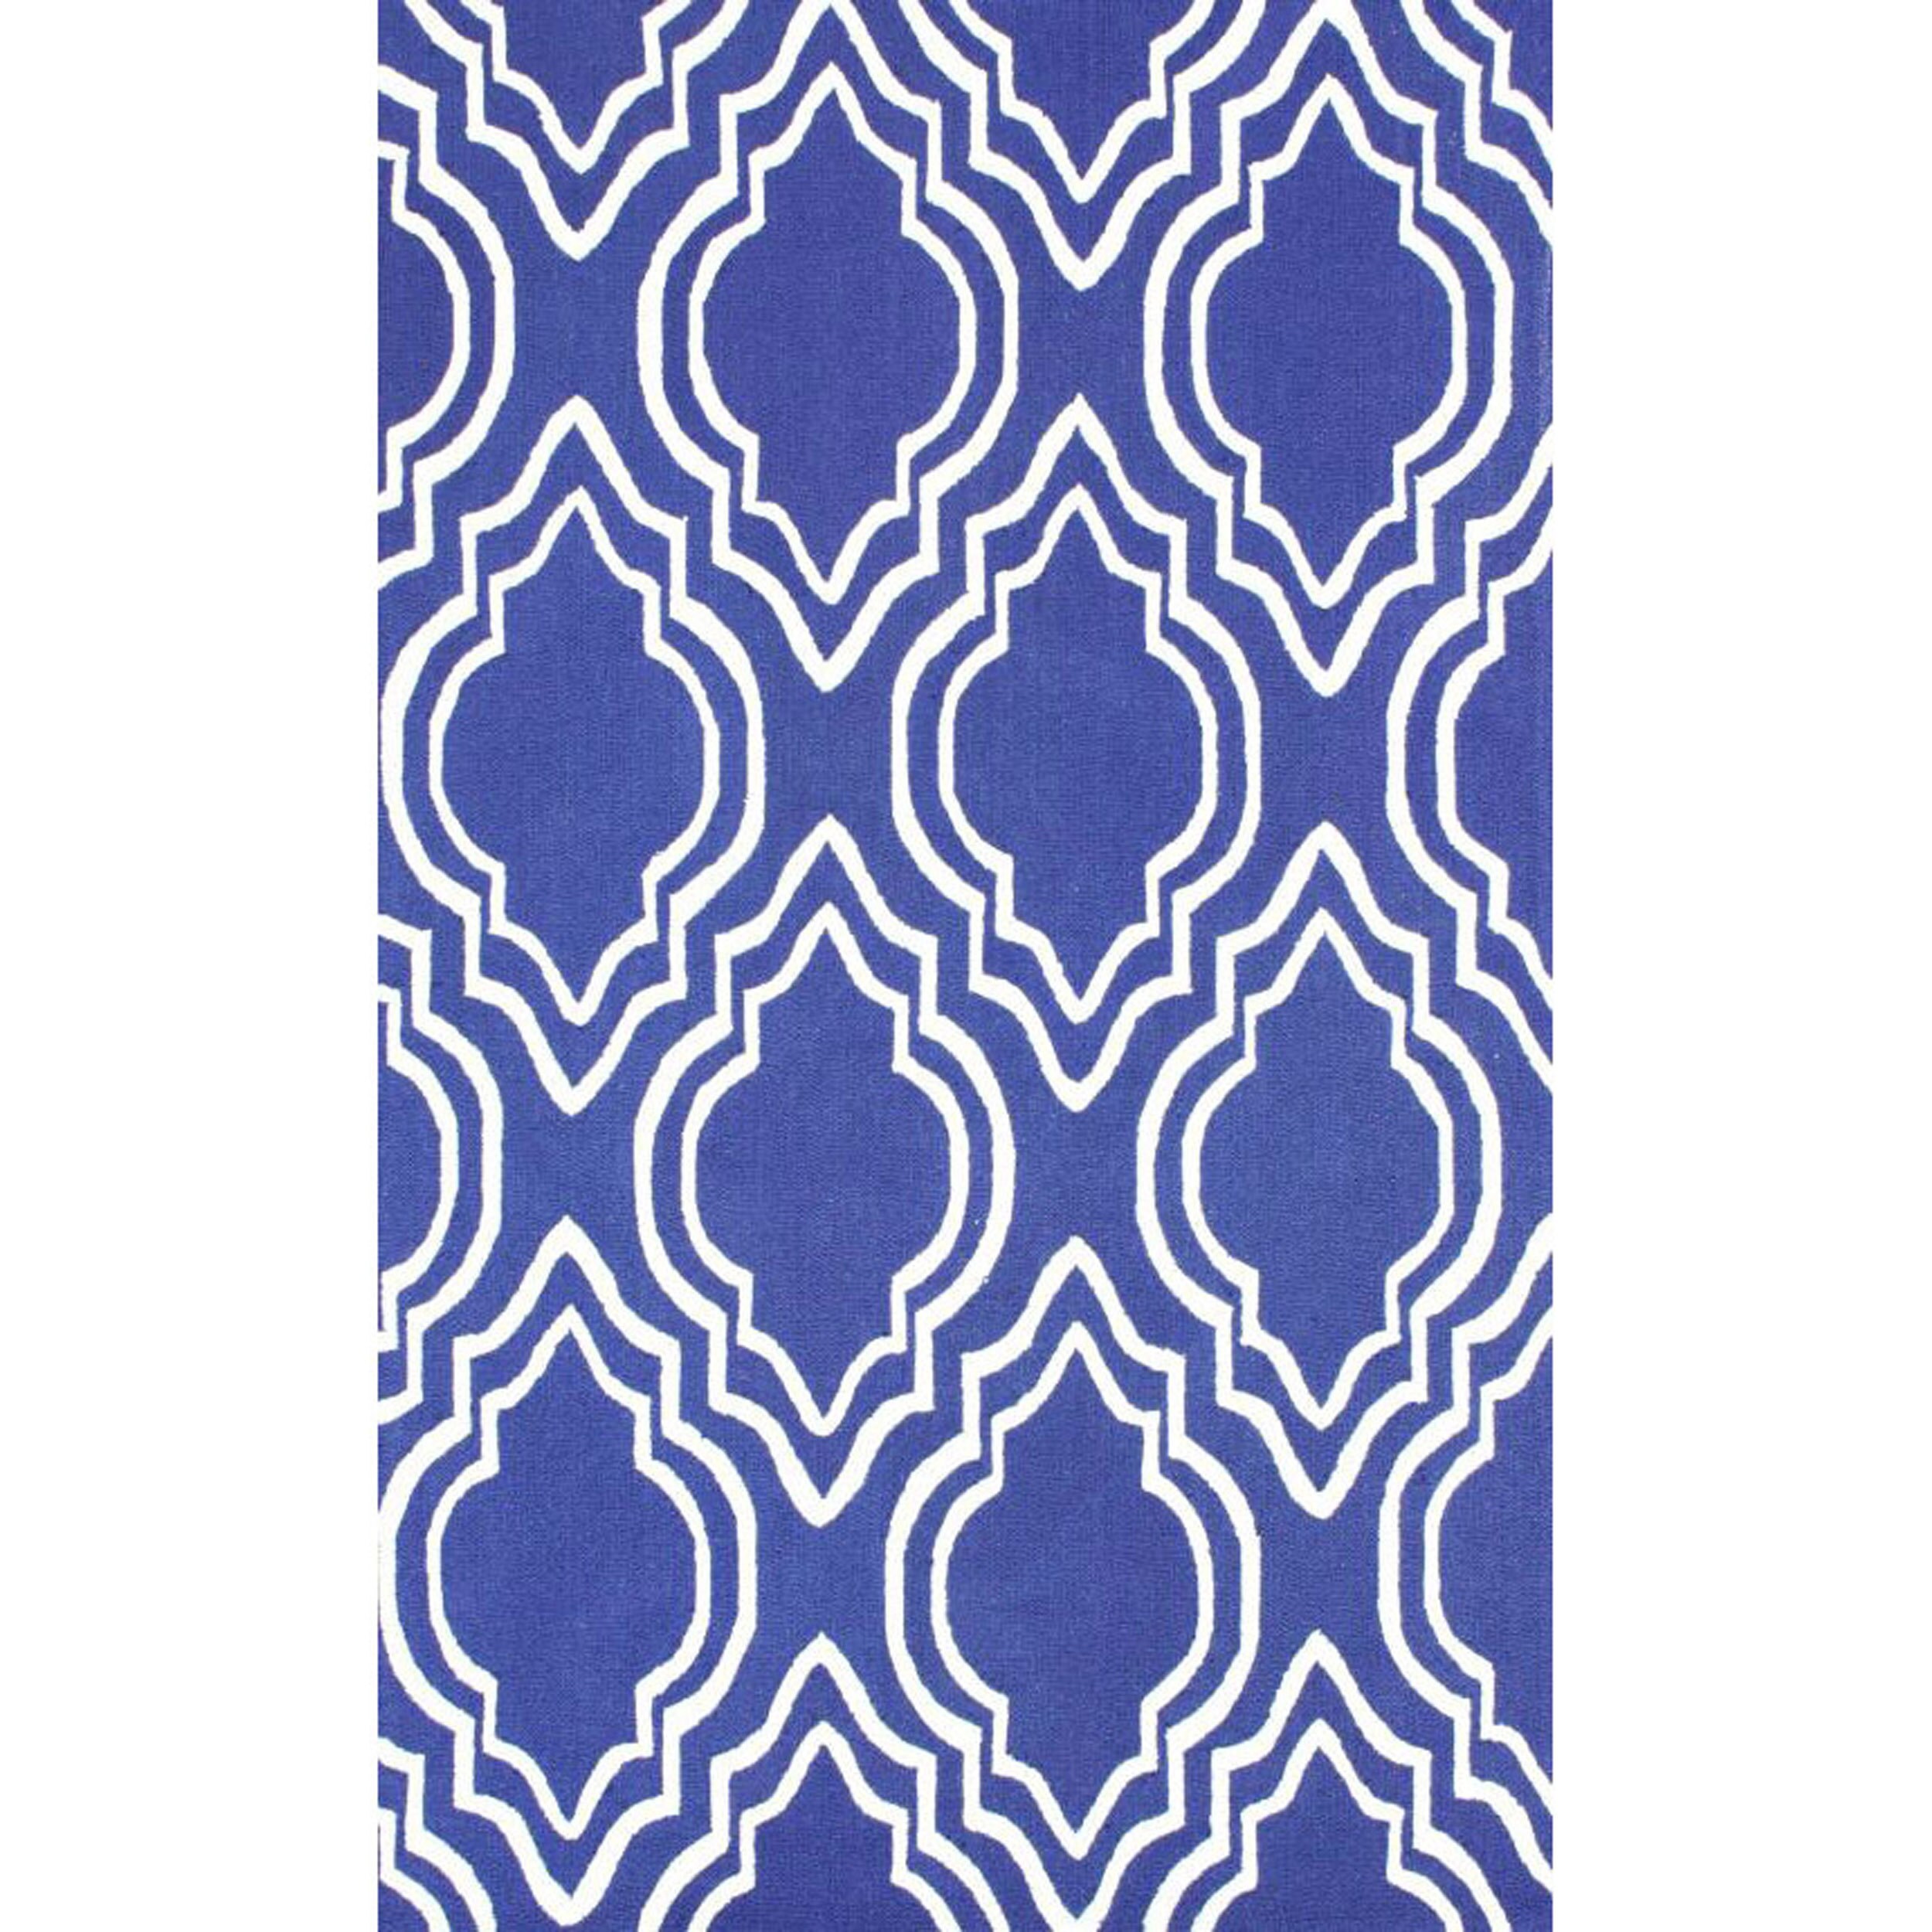 Nuloom Handmade Modern Trellis Blue Wool Rug (76 X 96) (IvoryPattern AbstractTip We recommend the use of a non skid pad to keep the rug in place on smooth surfaces.All rug sizes are approximate. Due to the difference of monitor colors, some rug colors m